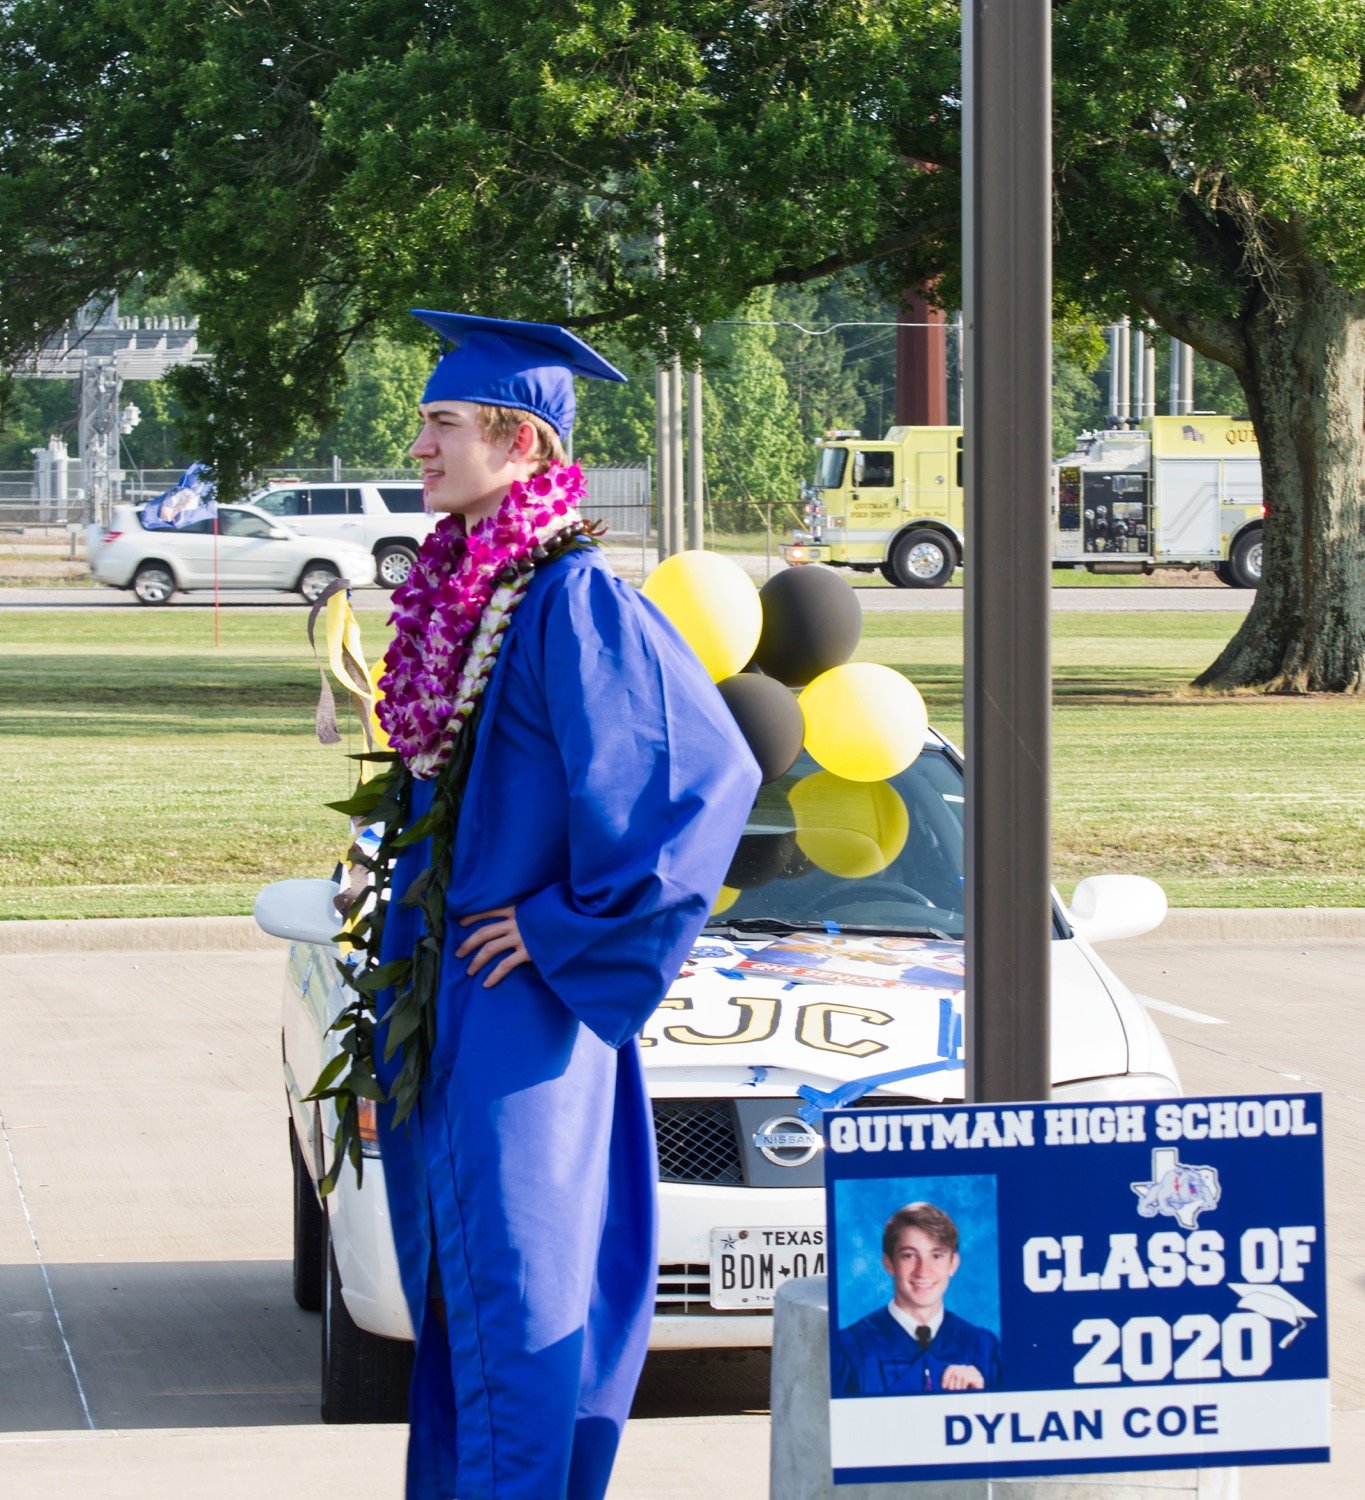 Quitman High School graduates wore the traditional cap and gown regalia for the reverse parade Thursday. A few added a little something to their outfit.